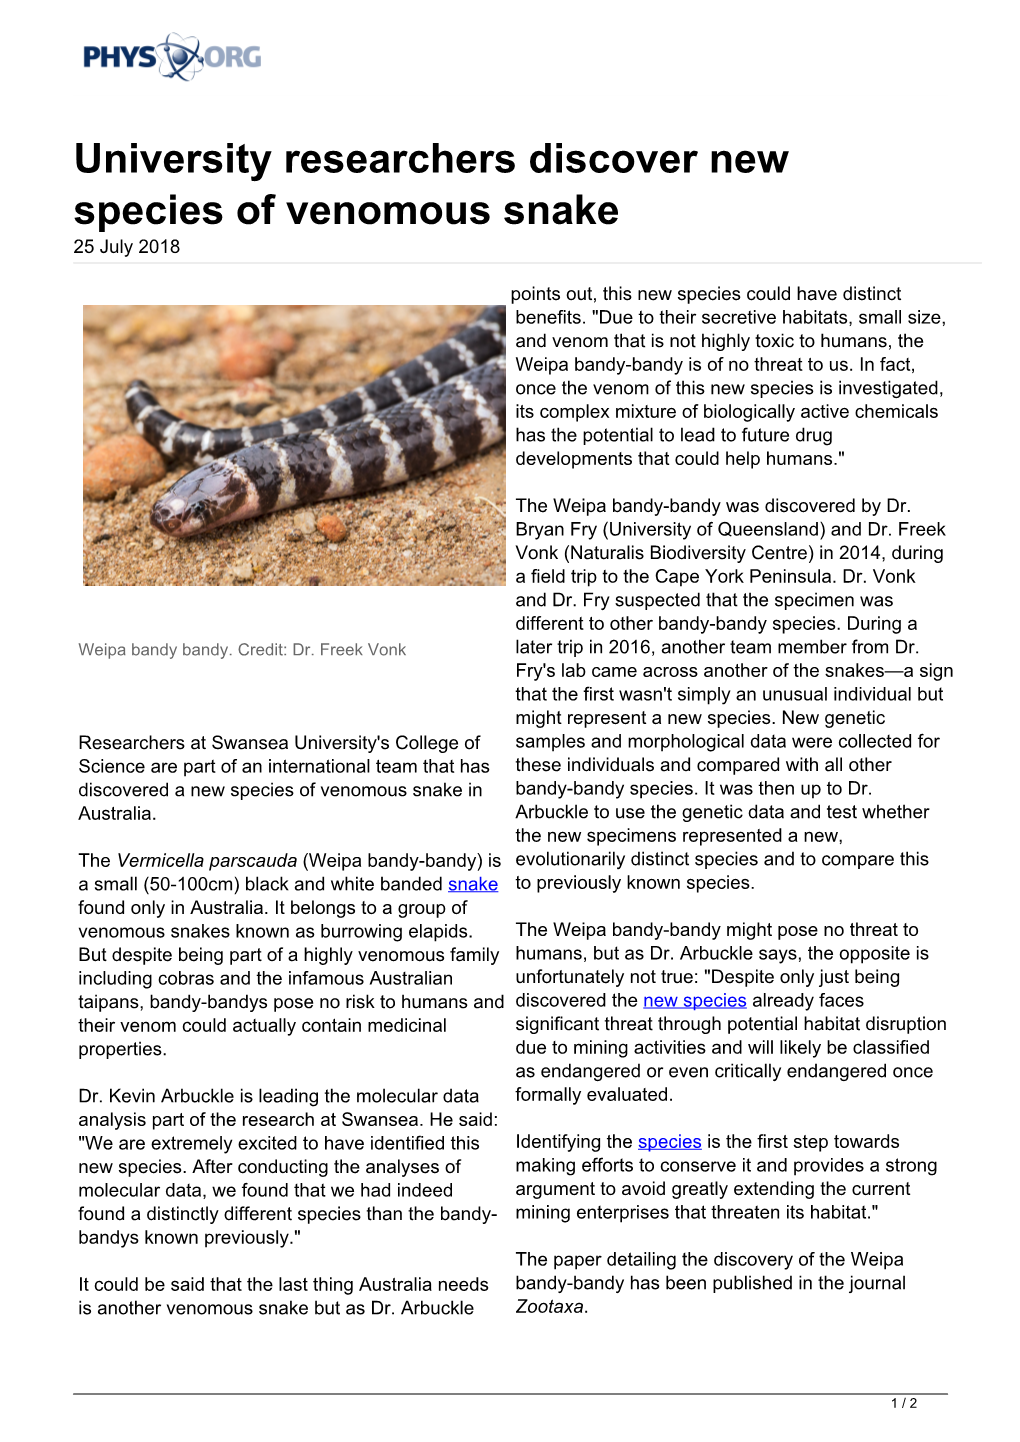 University Researchers Discover New Species of Venomous Snake 25 July 2018